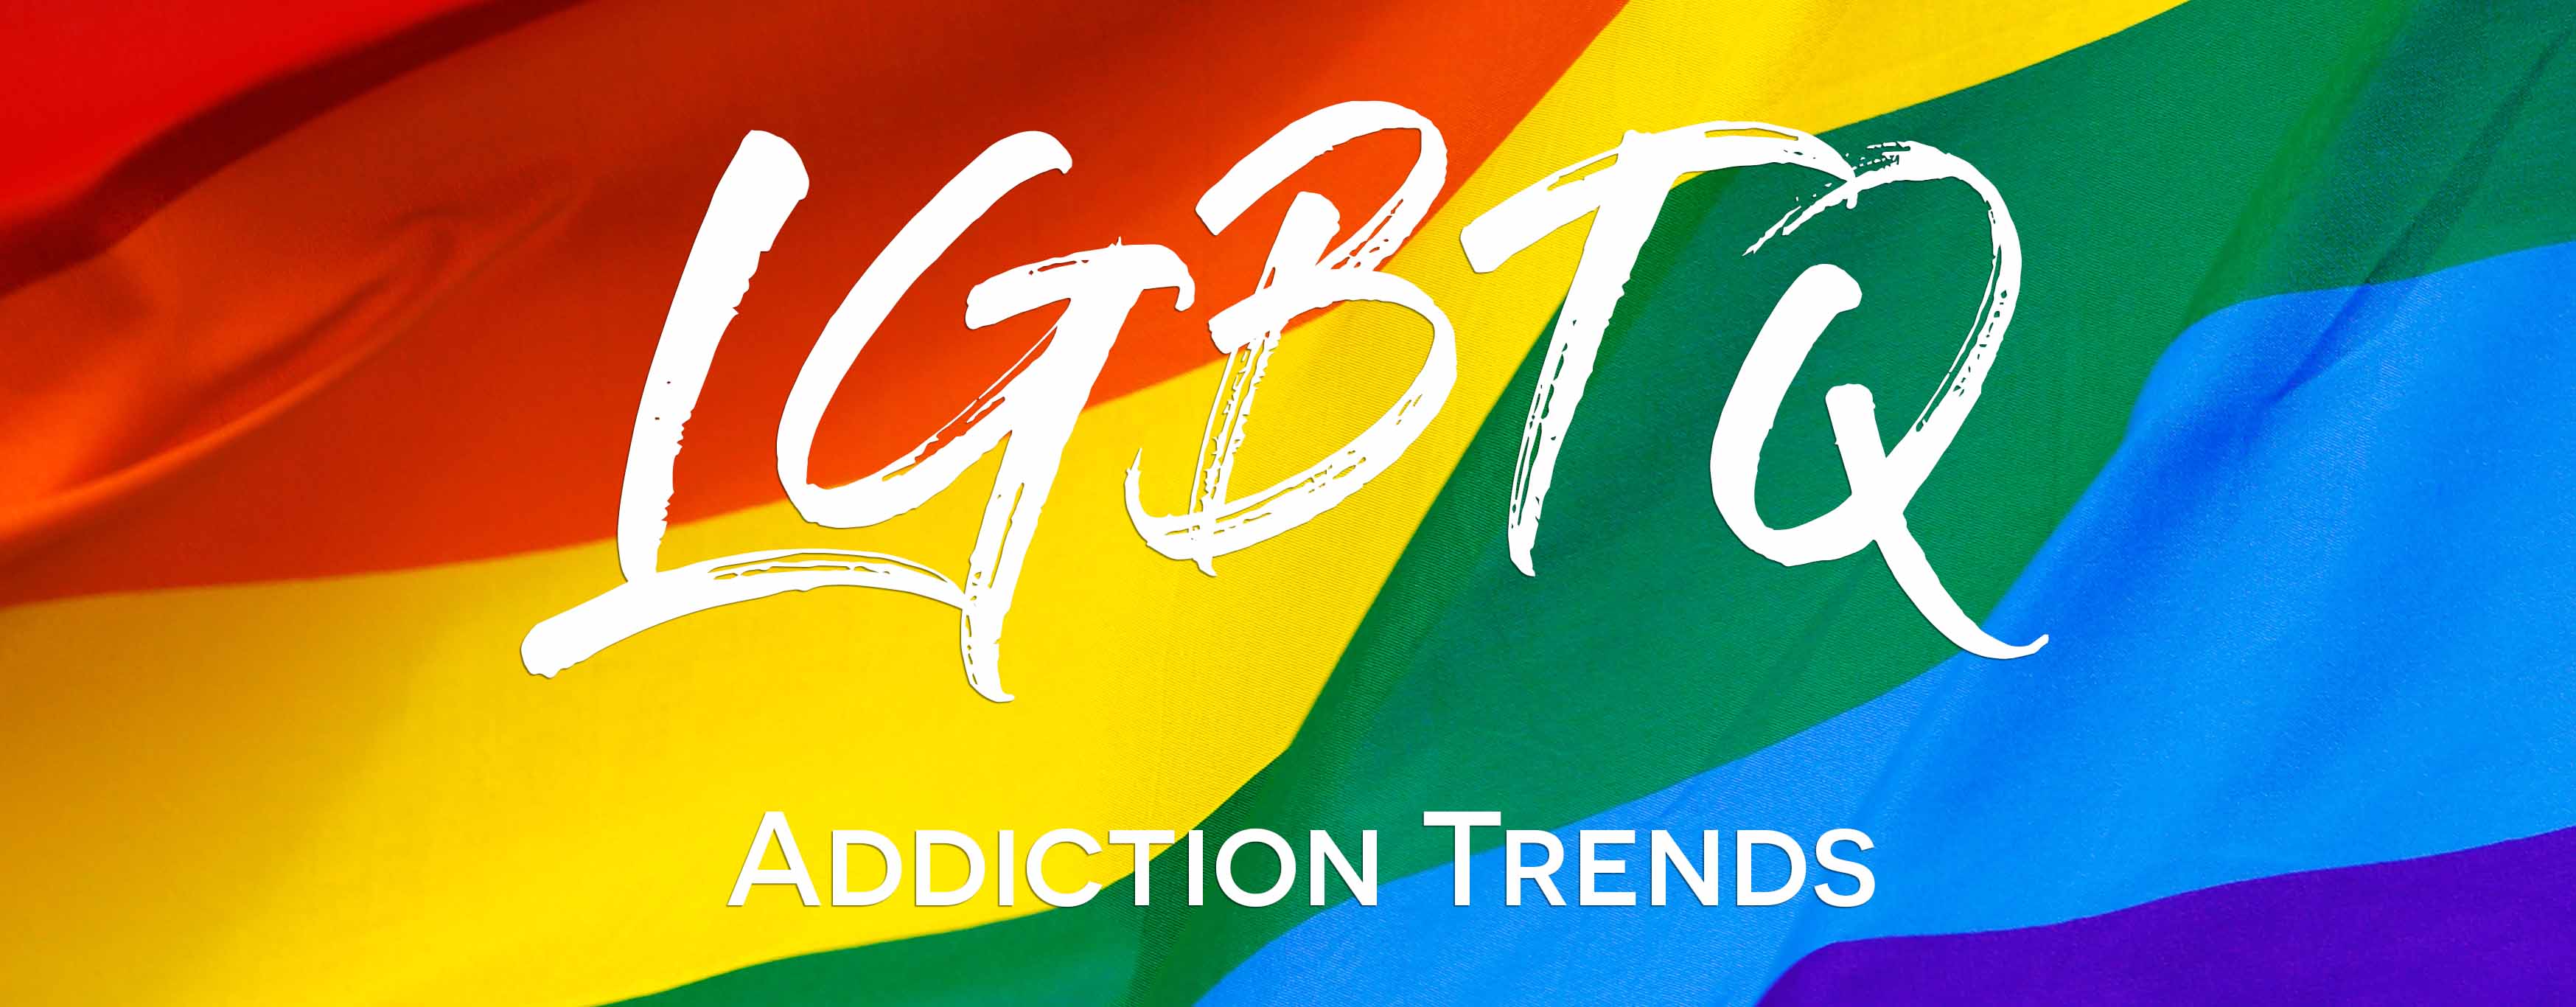 LGBTQ Community Substance Abuse and Addiction Trends